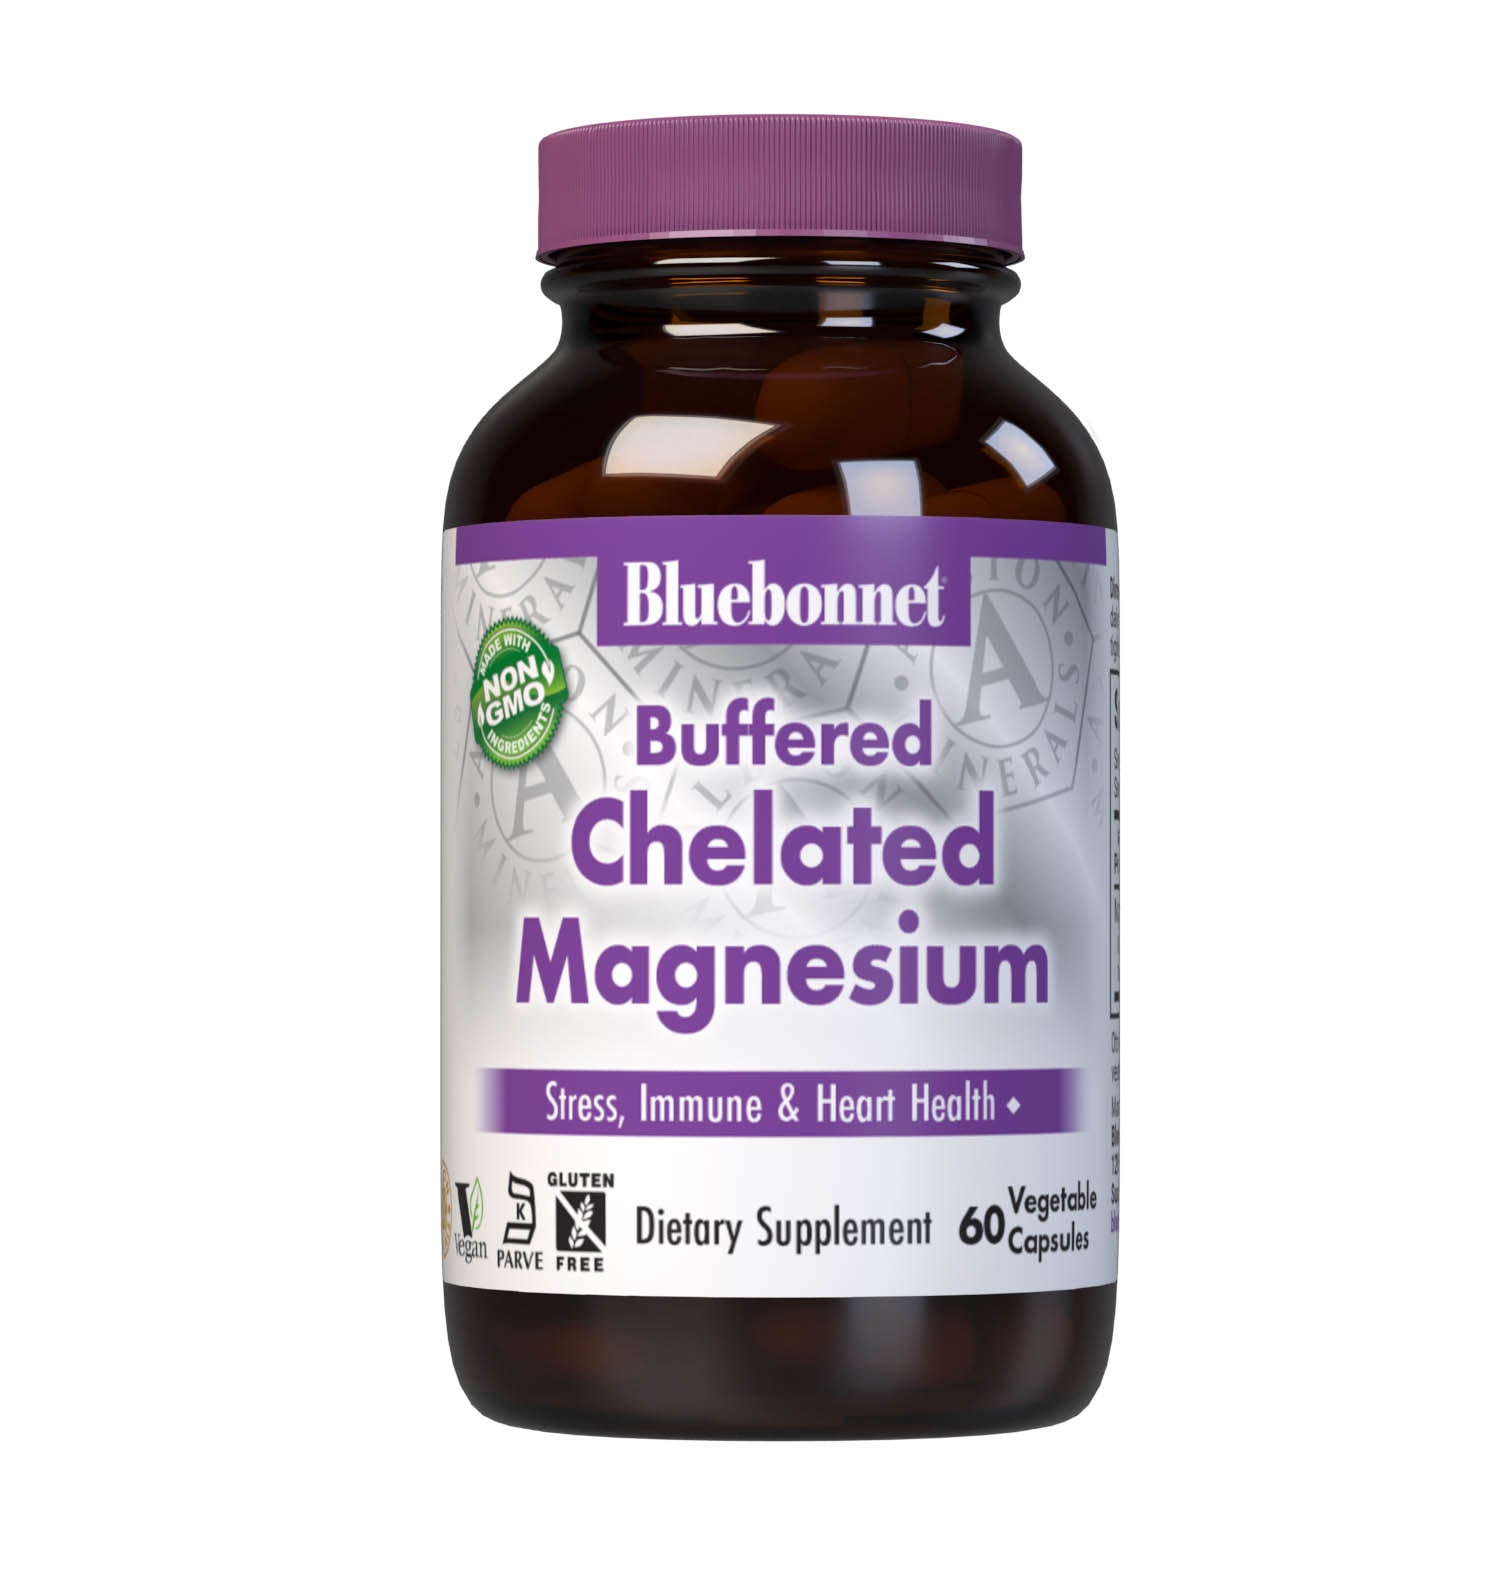 Bluebonnet's Buffered Chelated Magnesium 60 Vegetable Capsules are formulated with chelated magnesium bisglycinate buffered with magnesium oxide to increase the pH (alkalinity) to make it gentle on the digestive tract. #size_60 count